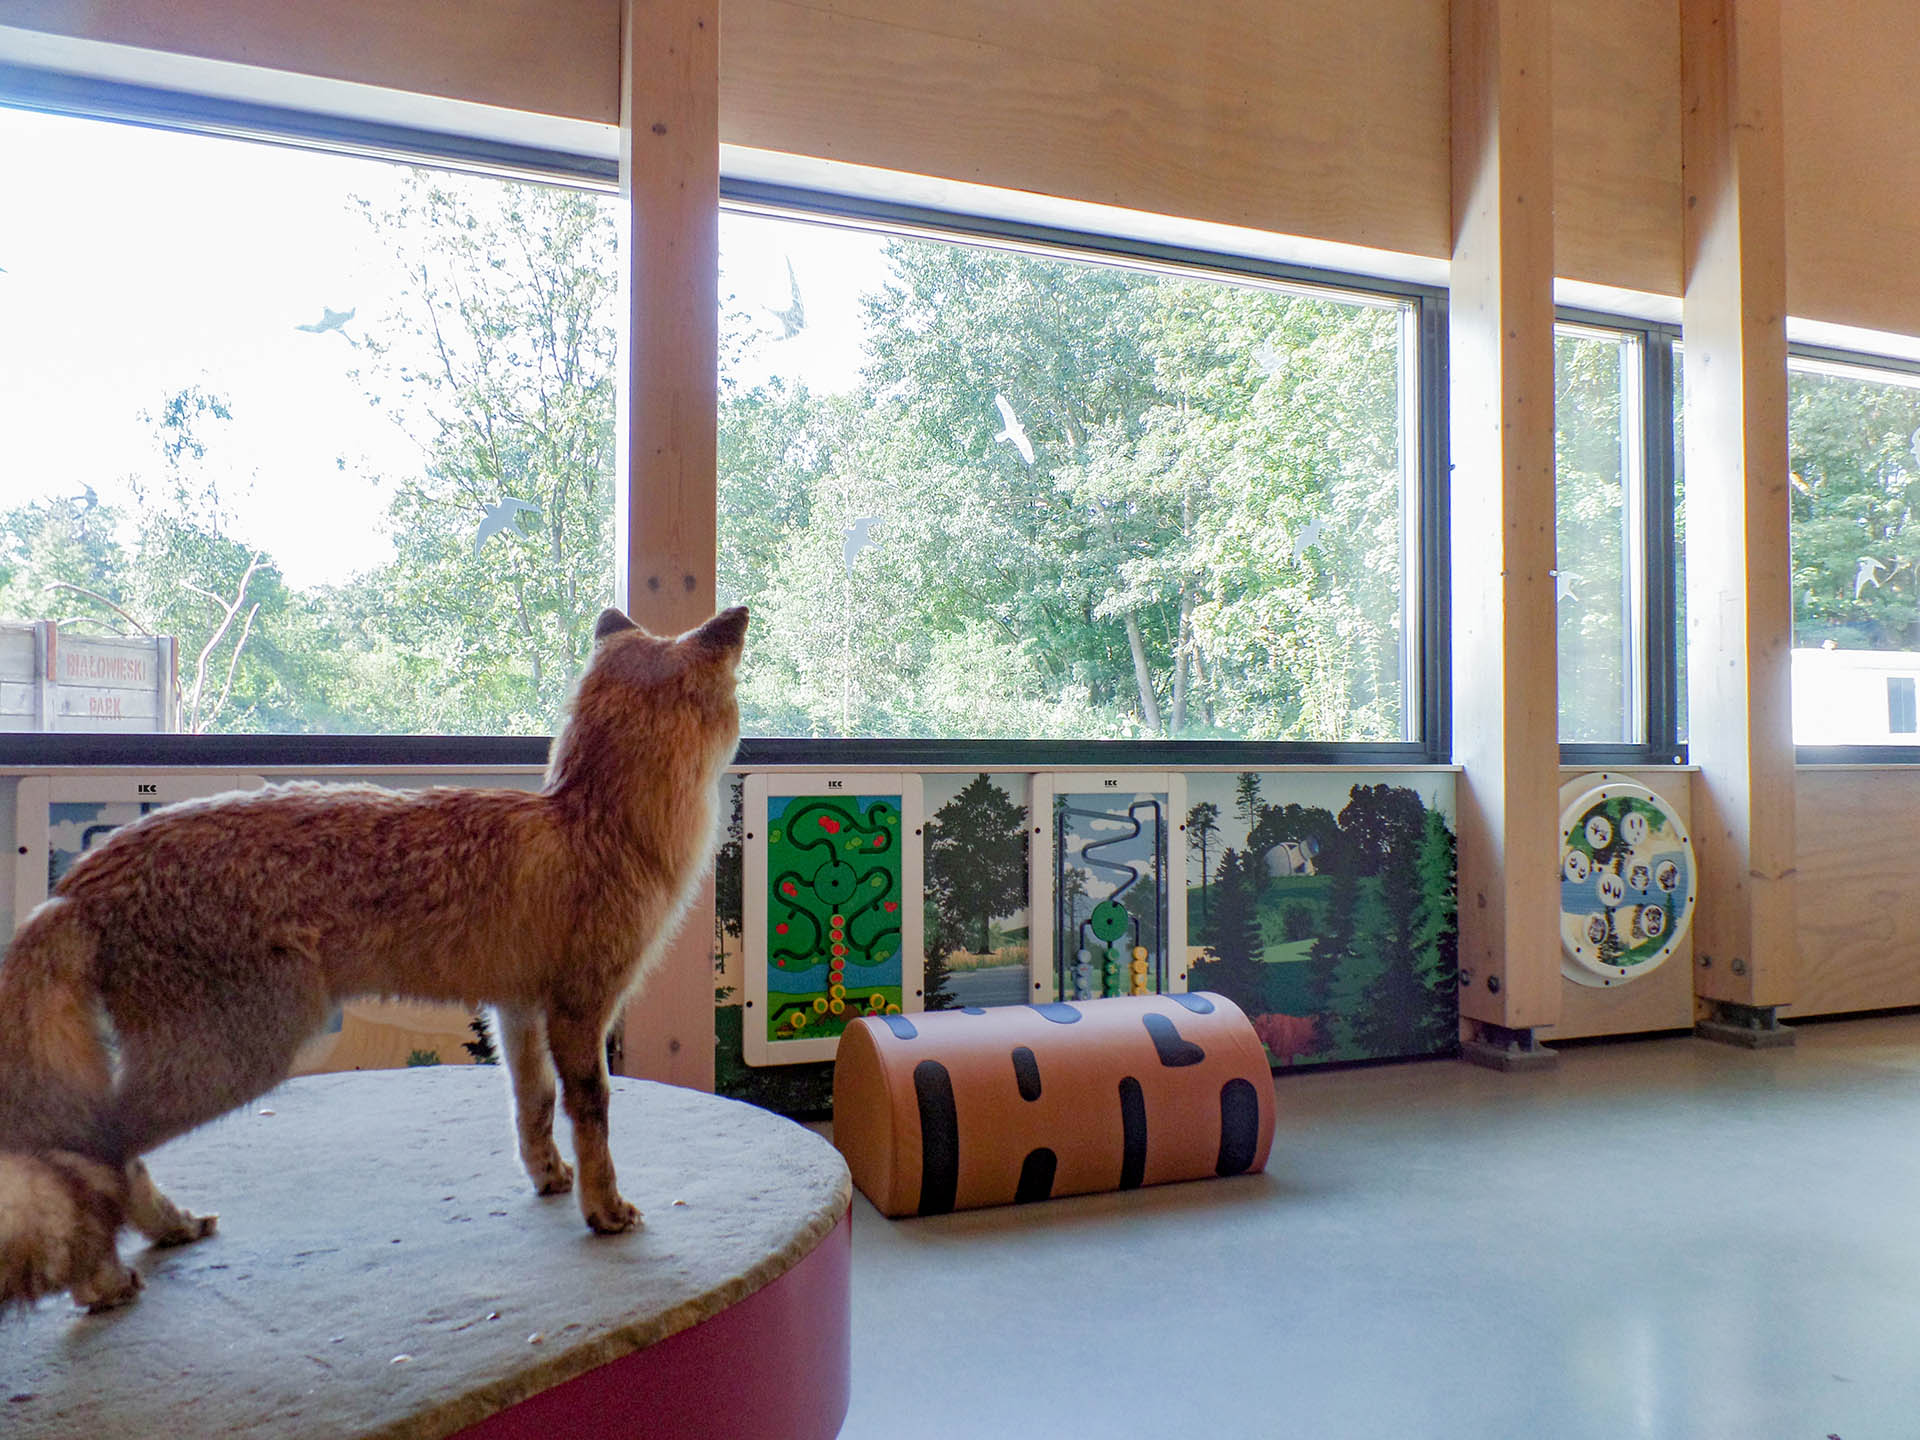 This picture shows a play corner in a visitors information centre of a Dutch national park